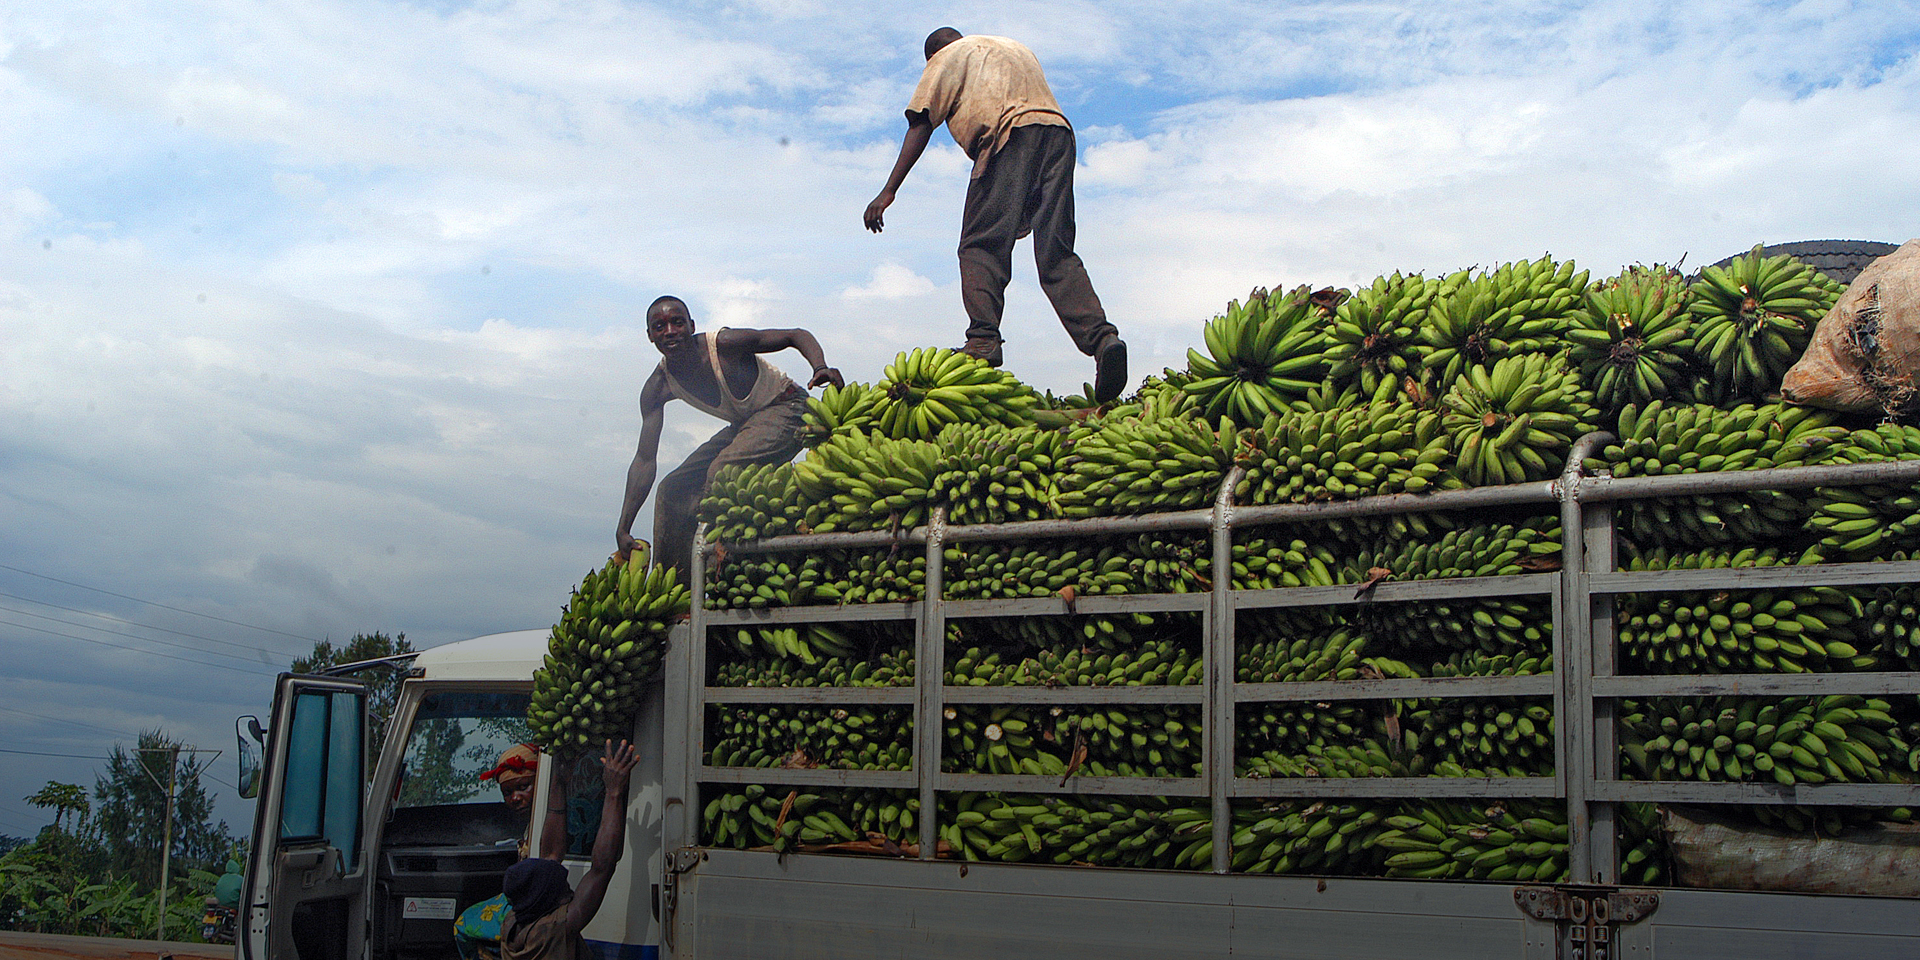 Image of a truck filled with bushels of plantains being unloaded by workers standing on top.